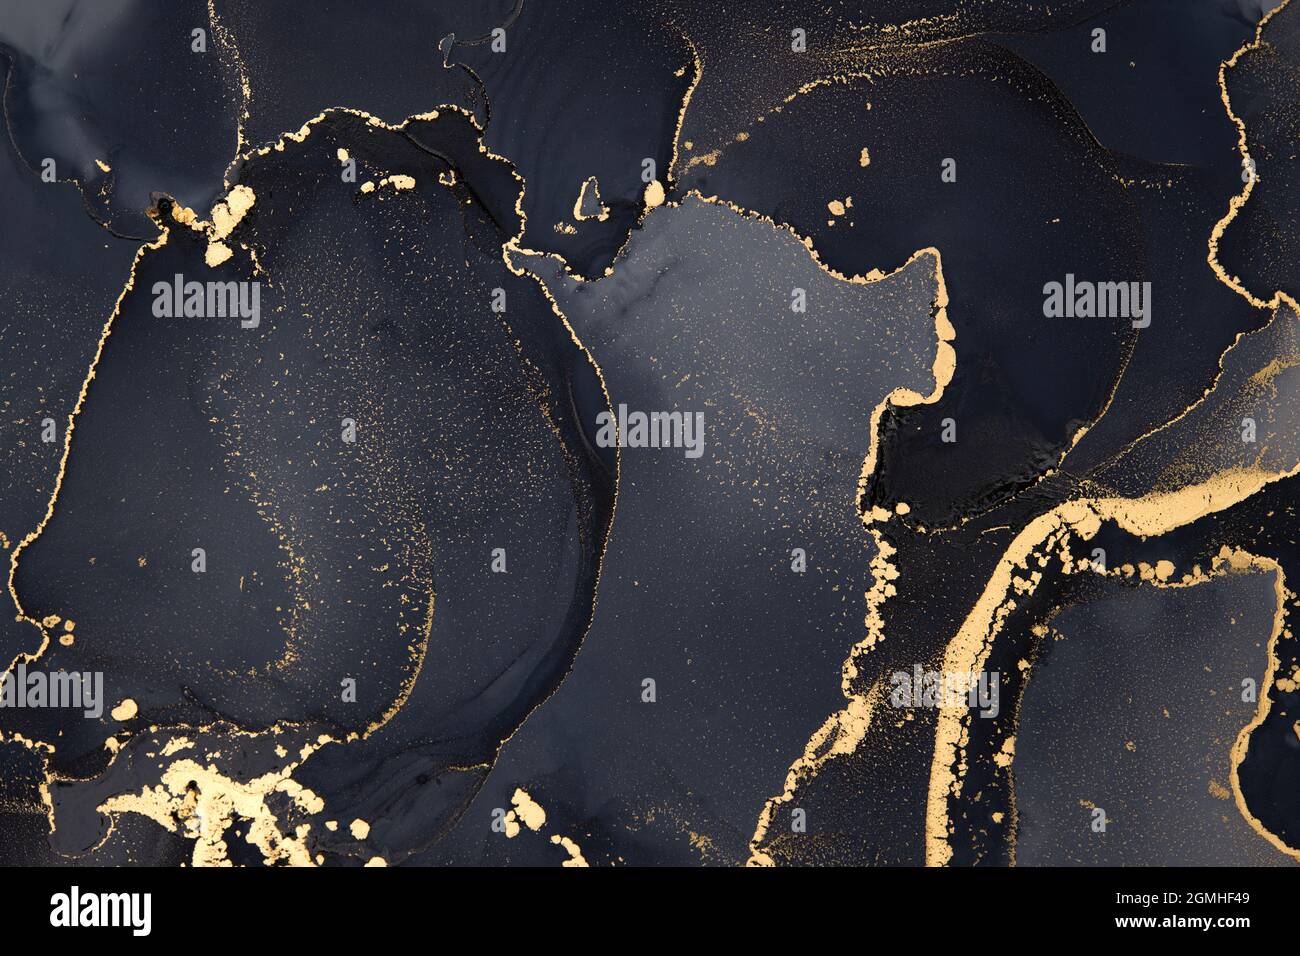 Luxury abstract fluid art painting background alcohol ink technique black and gold. Stock Photo